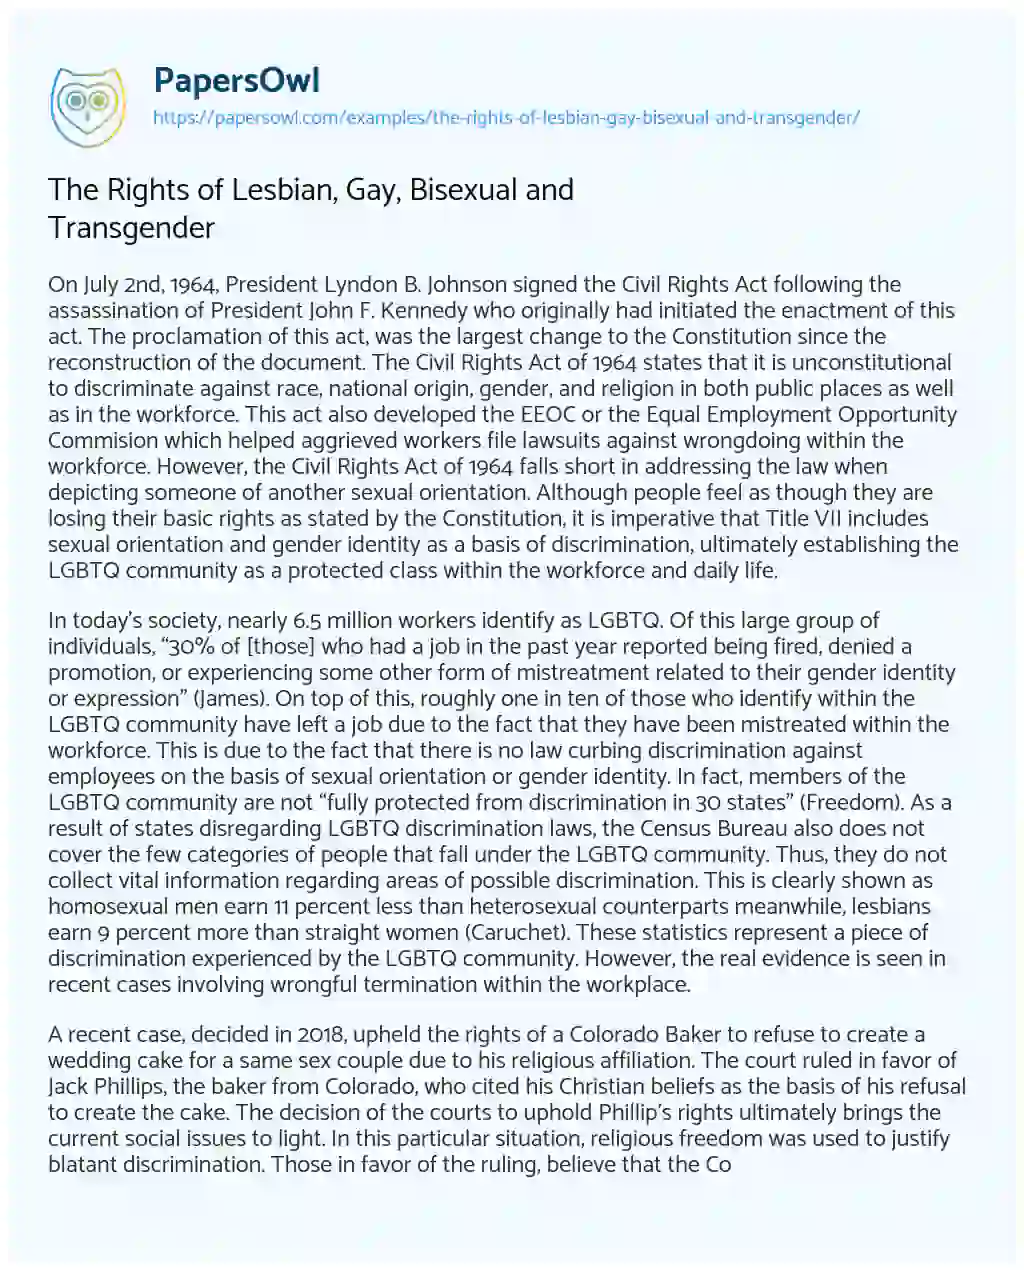 Essay on The Rights of Lesbian, Gay, Bisexual and Transgender